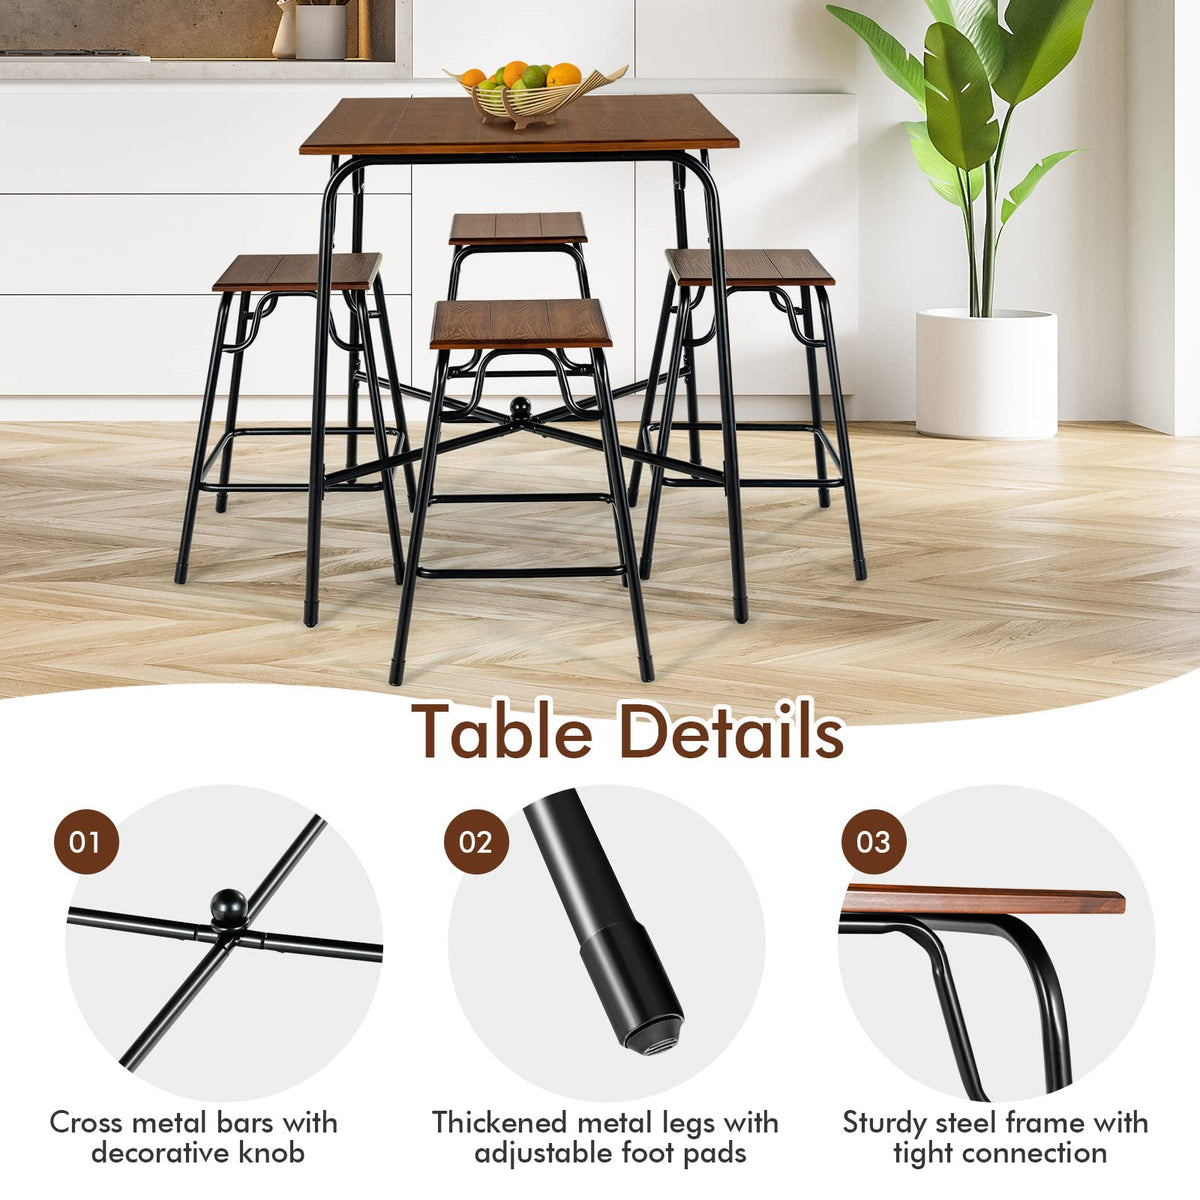 Giantex 5-Piece Bar Table Set, Vintage Counter Height Square Table w/ 4-Piece Classic Backless Stools, Rustic Brown